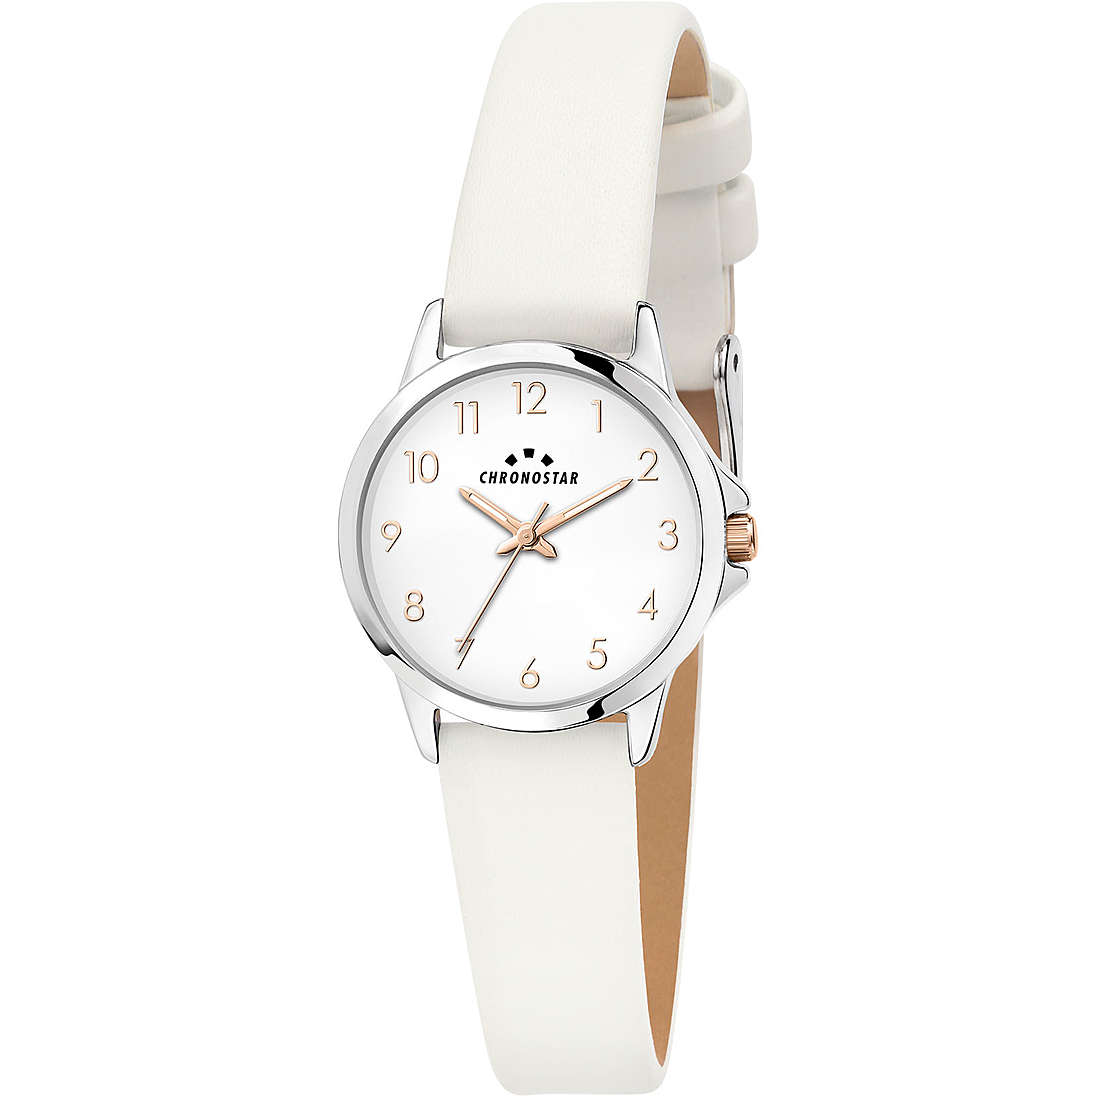 only time watch Metal White dial woman Streamer R3851285501